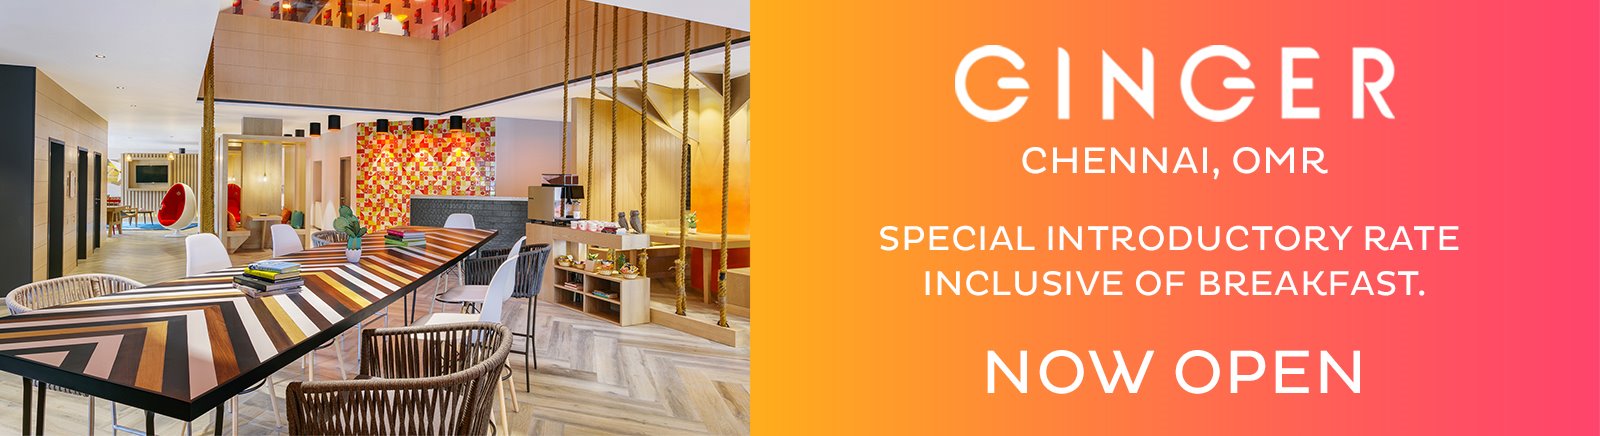 Ginger Chennai OMR Special Offers